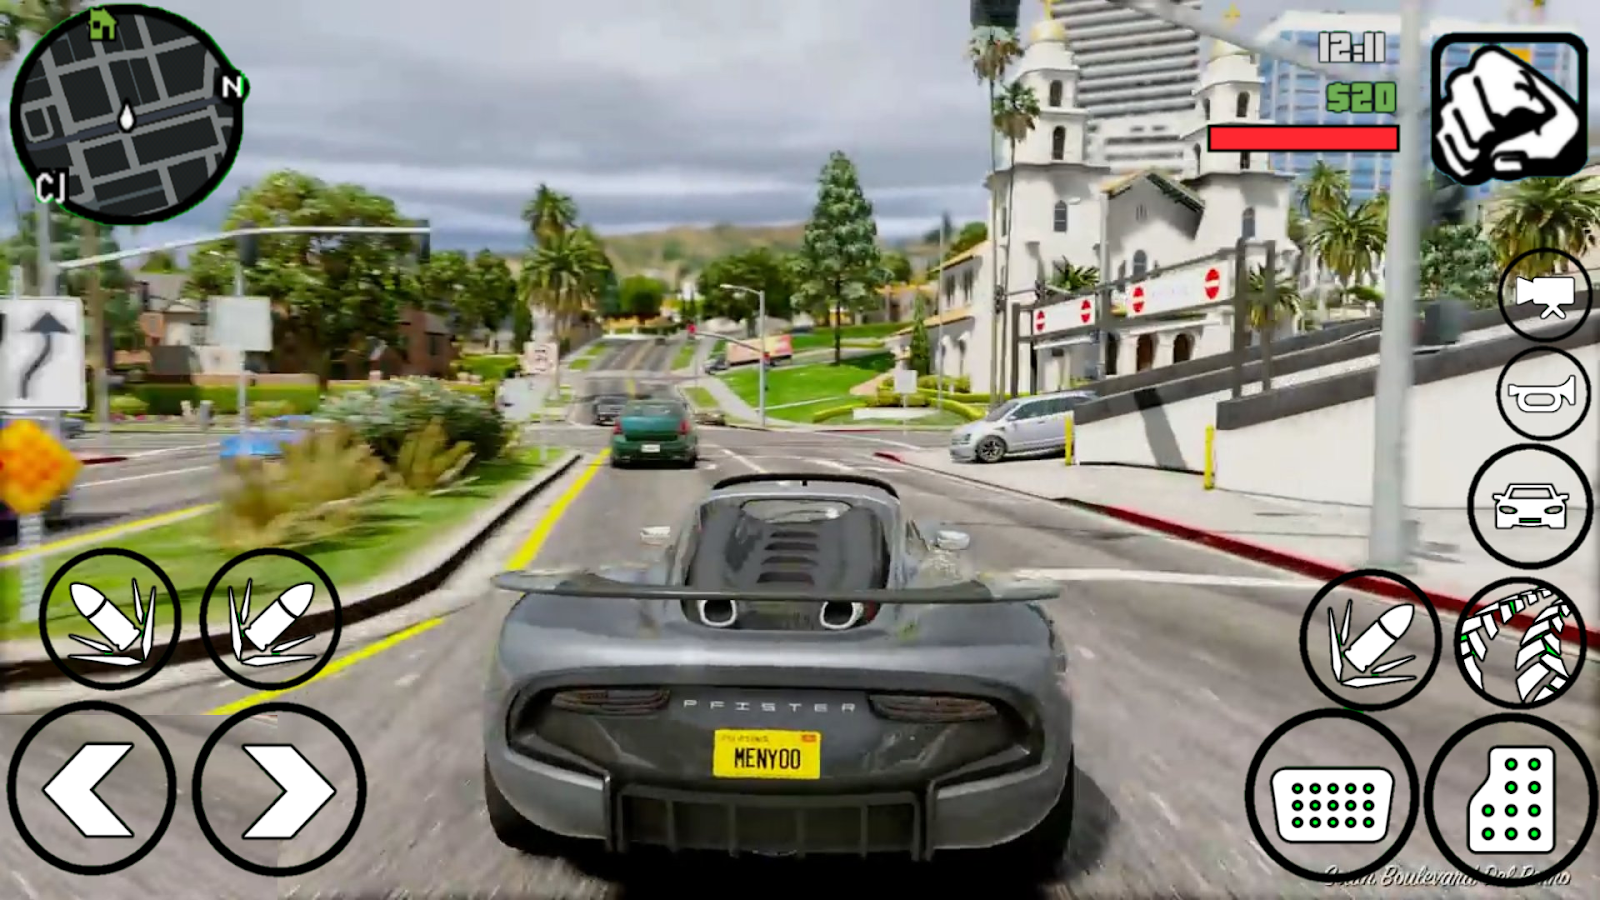 Gta 5 mod apk download for android 4 0